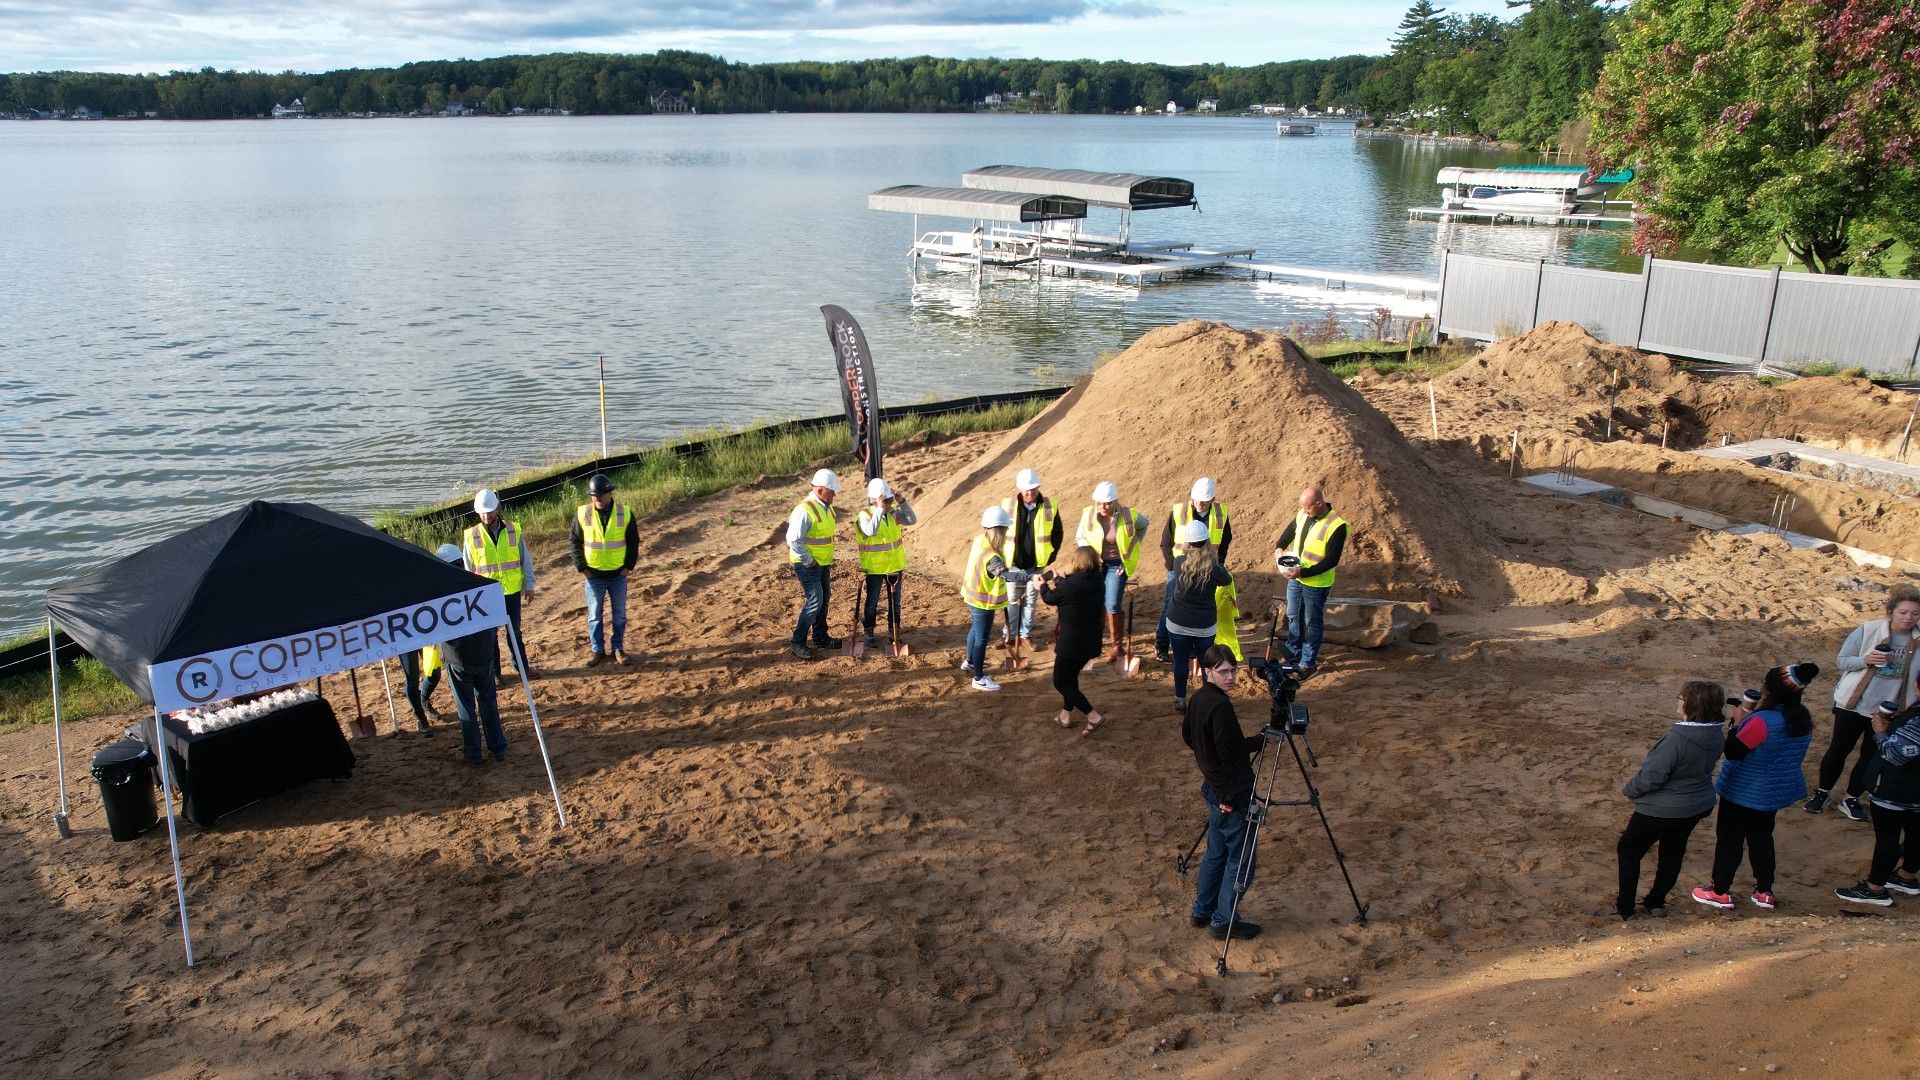 A ground breaking took place today for the new building that will house the Smuggler's Cove restaurant.